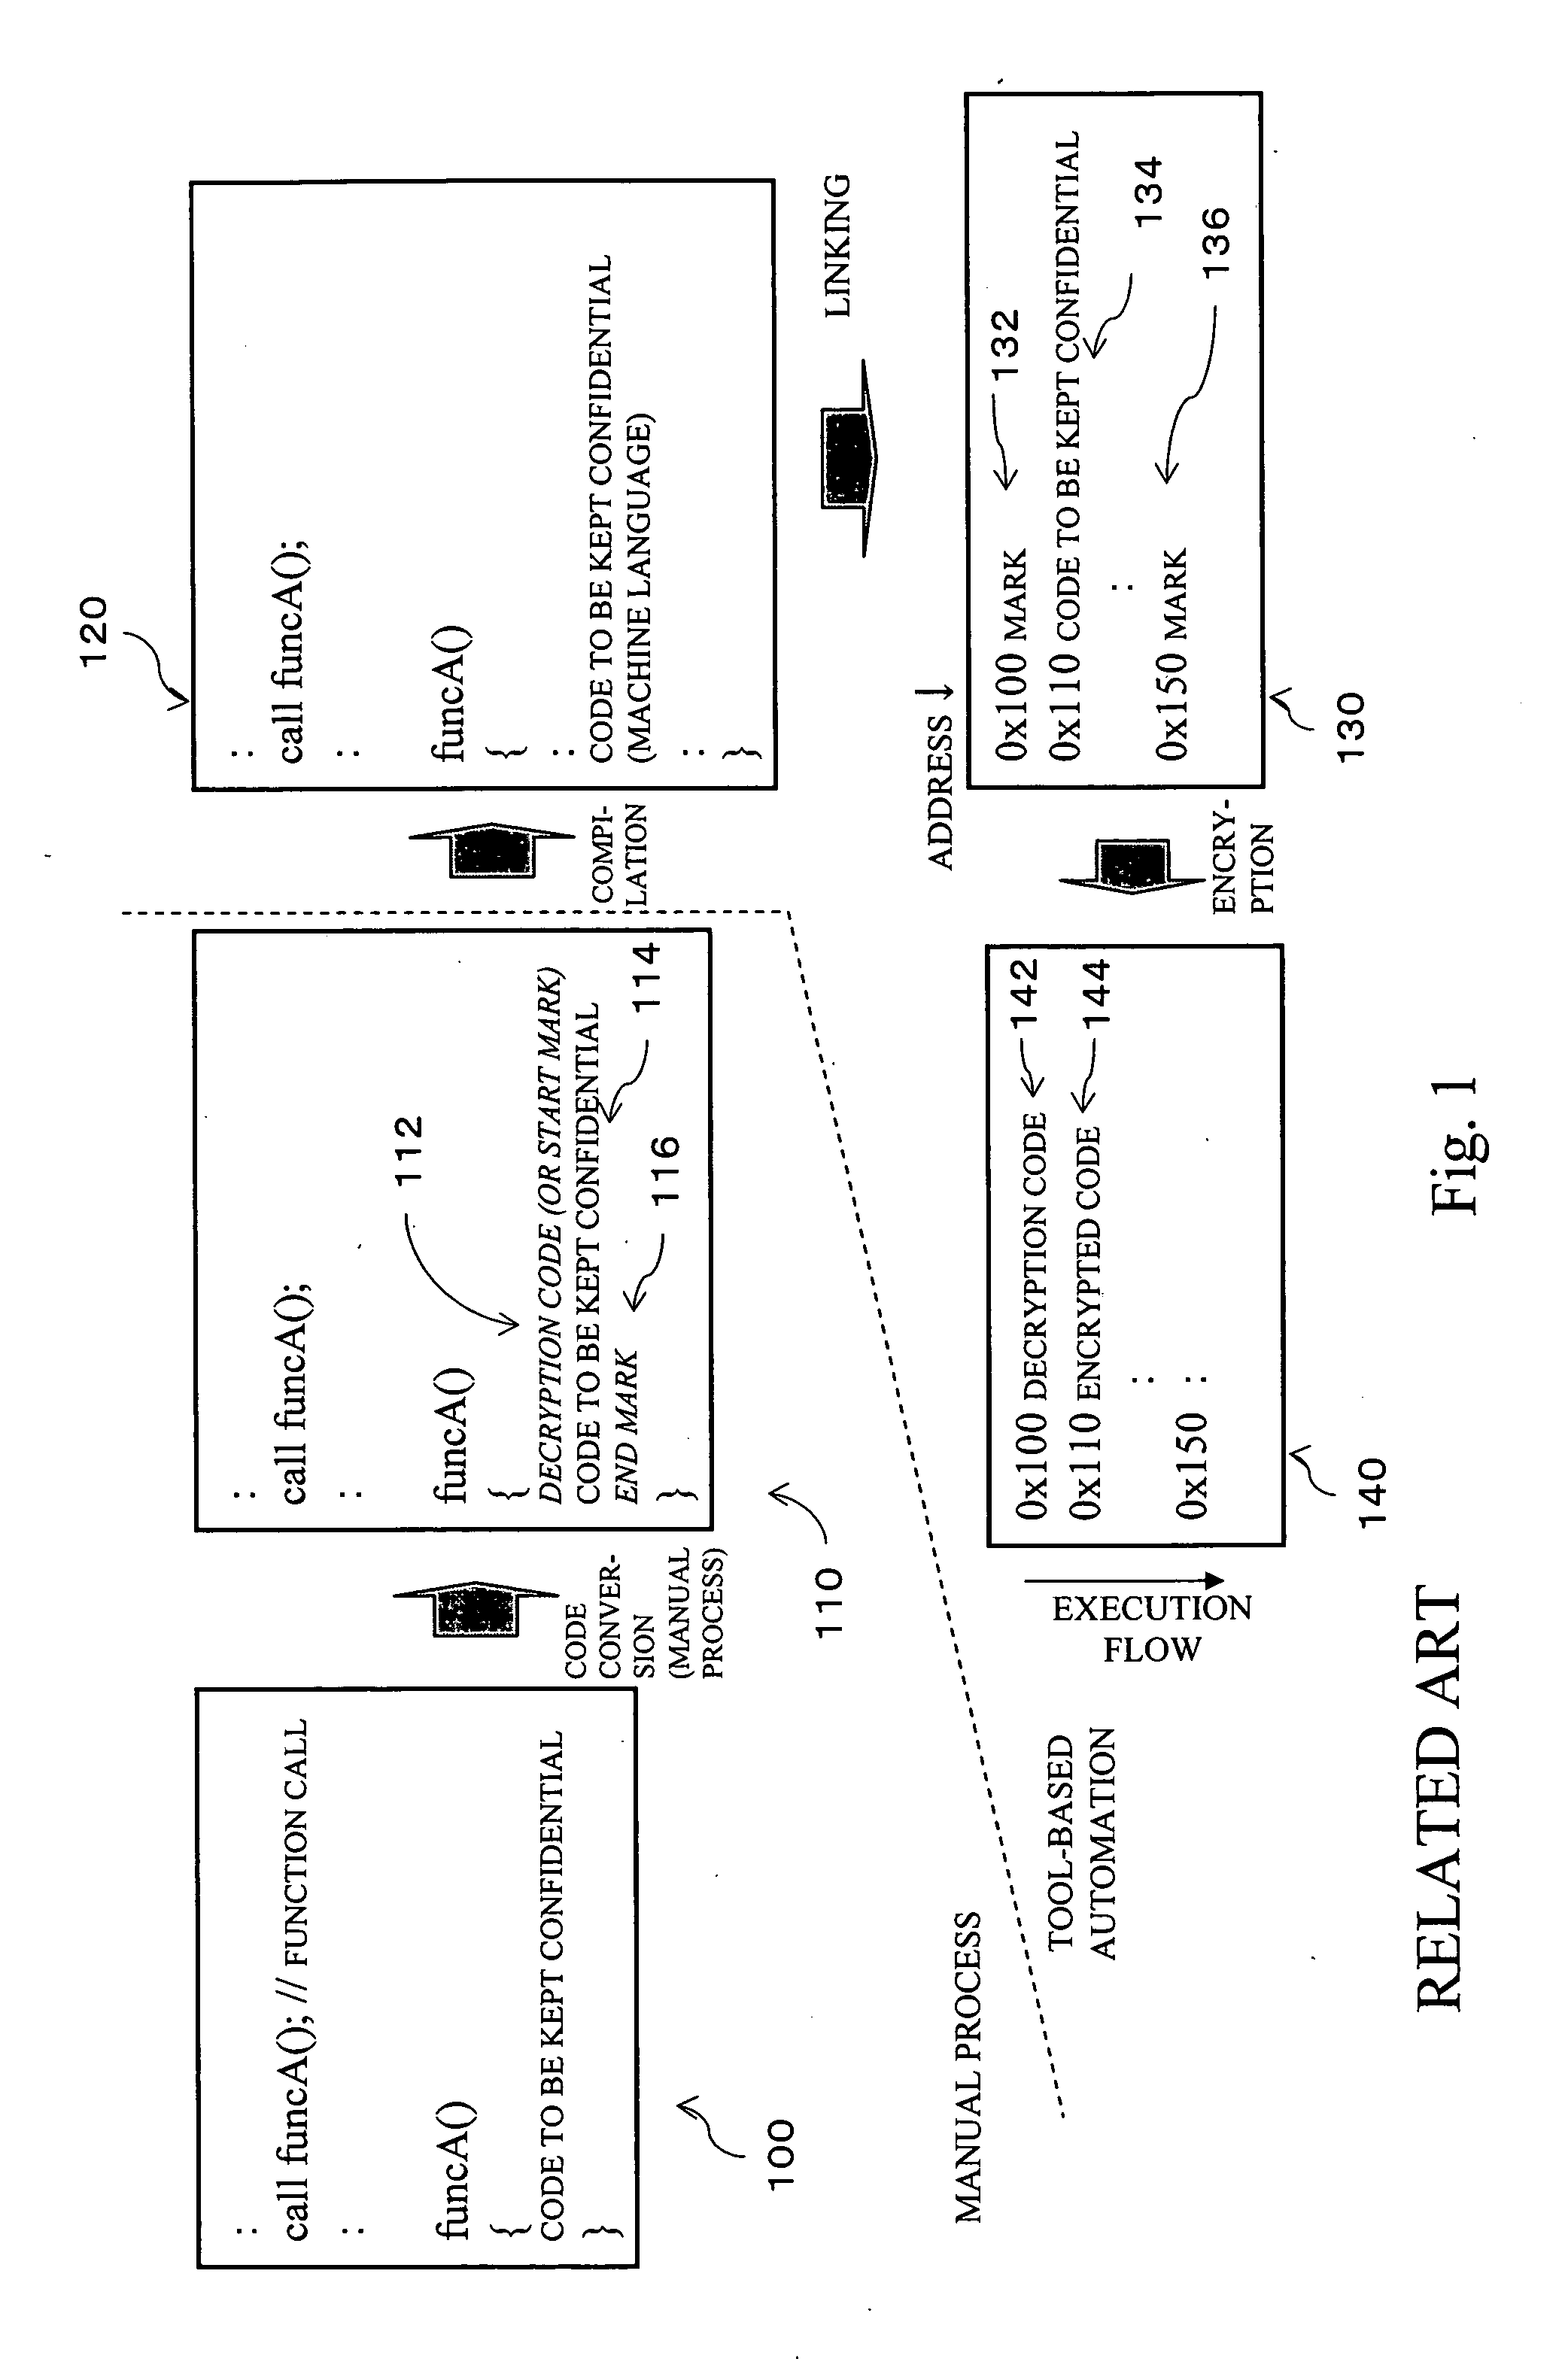 Storage medium, method, and apparatus for creating a protected executable program